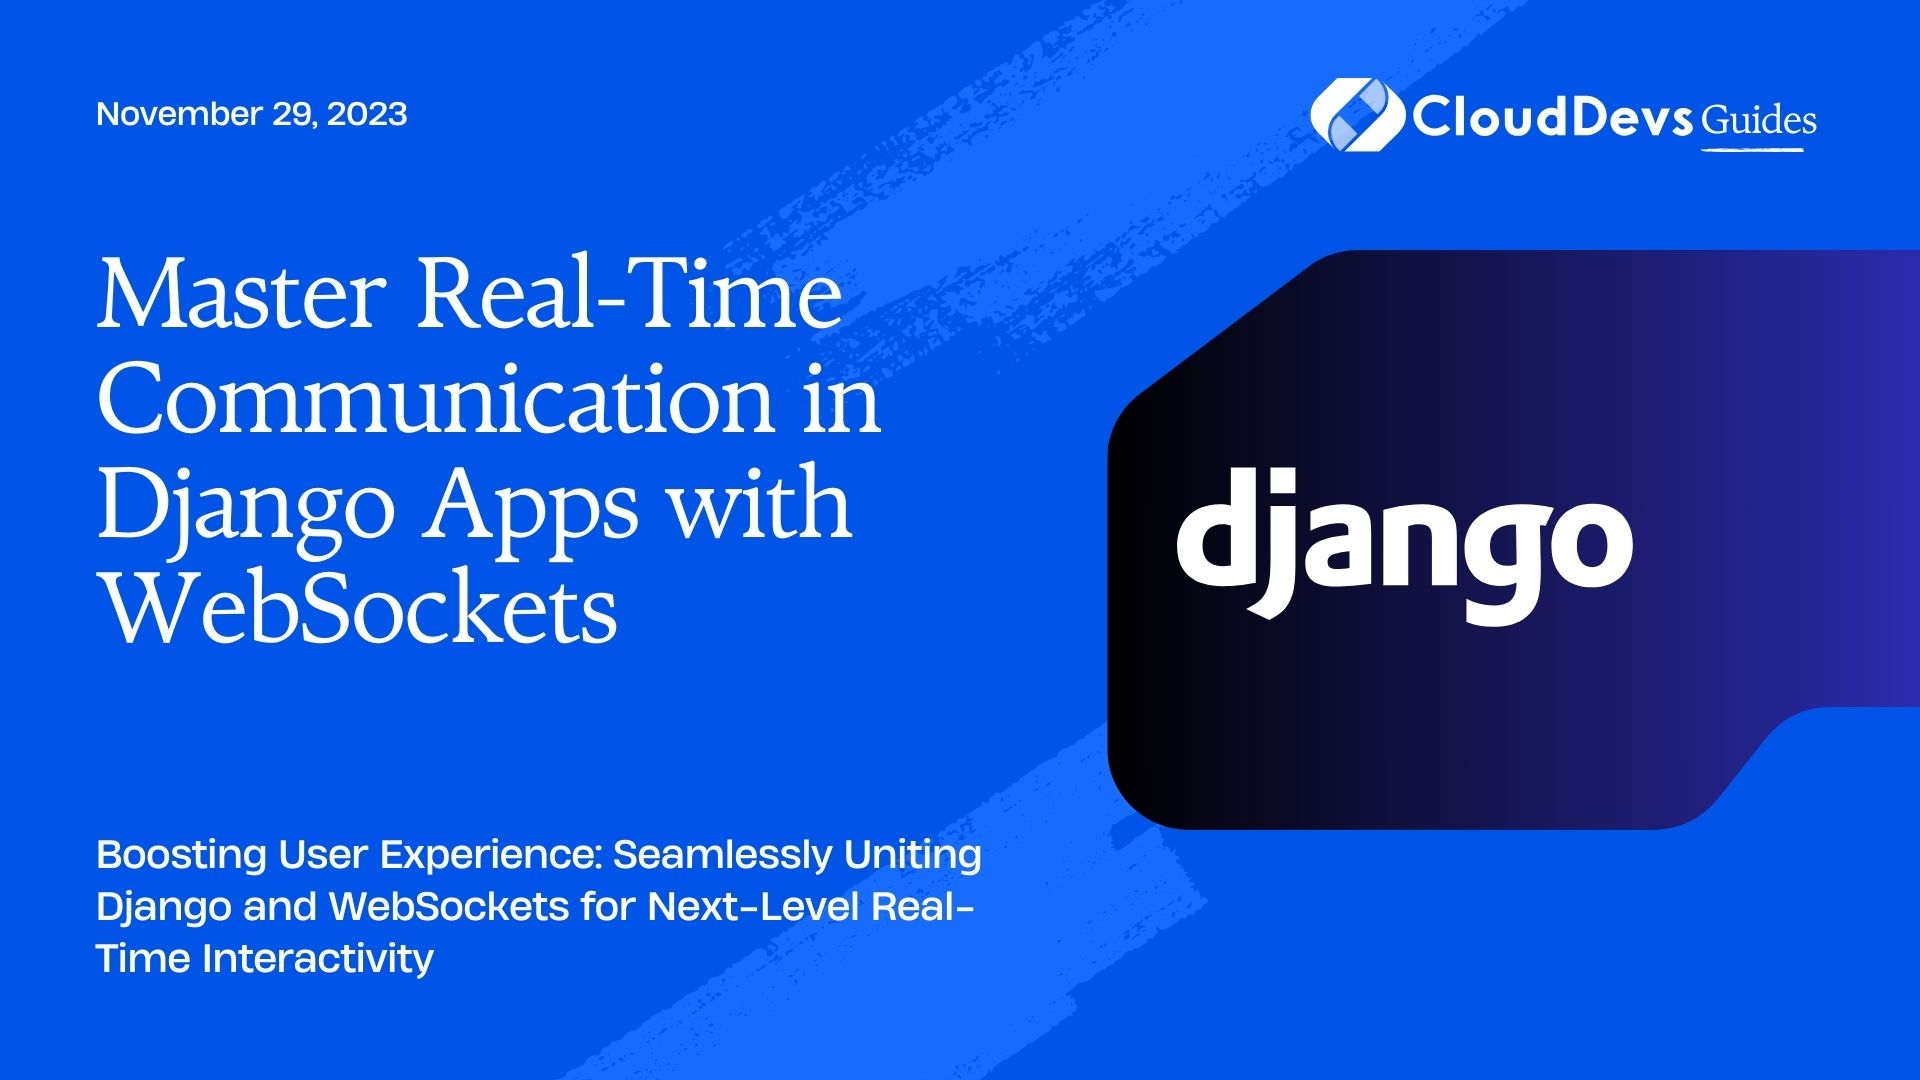 Master Real-Time Communication in Django Apps with WebSockets